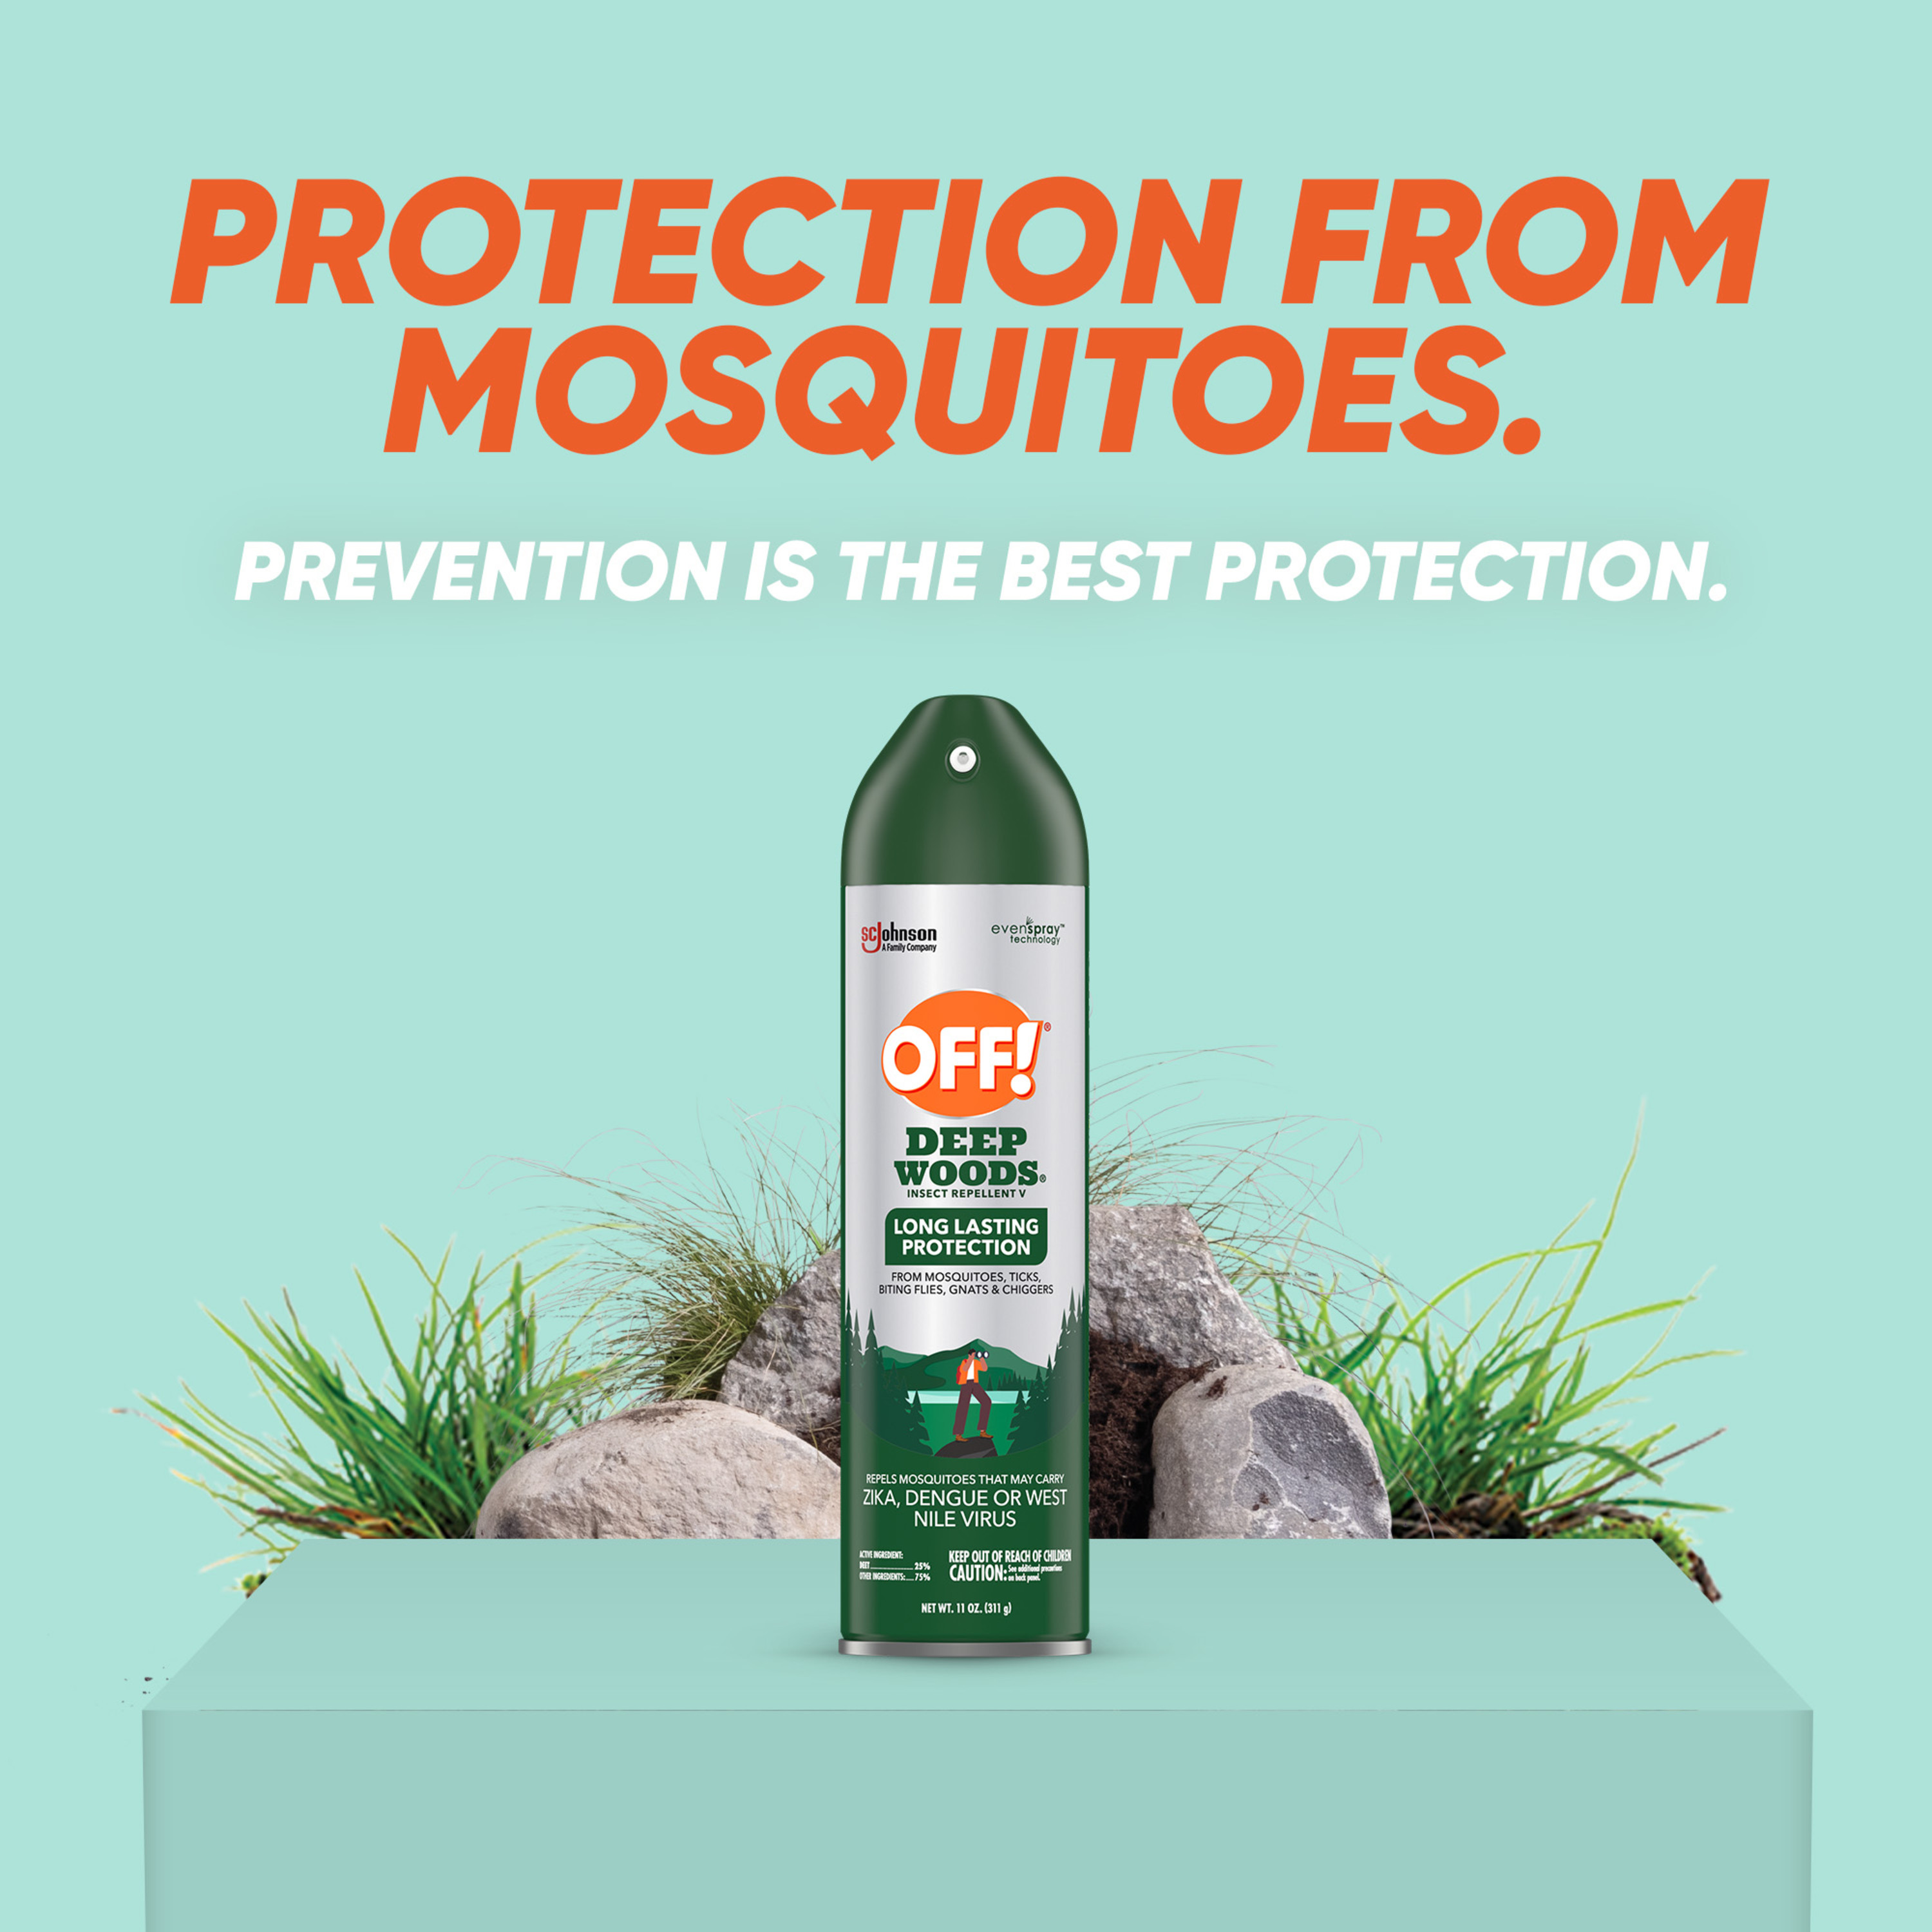 OFF! Deep Woods Insect Repellent V, Mosquito Bug Spray, Up to 8 Hours of Protection with DEET, 11 oz - image 3 of 17